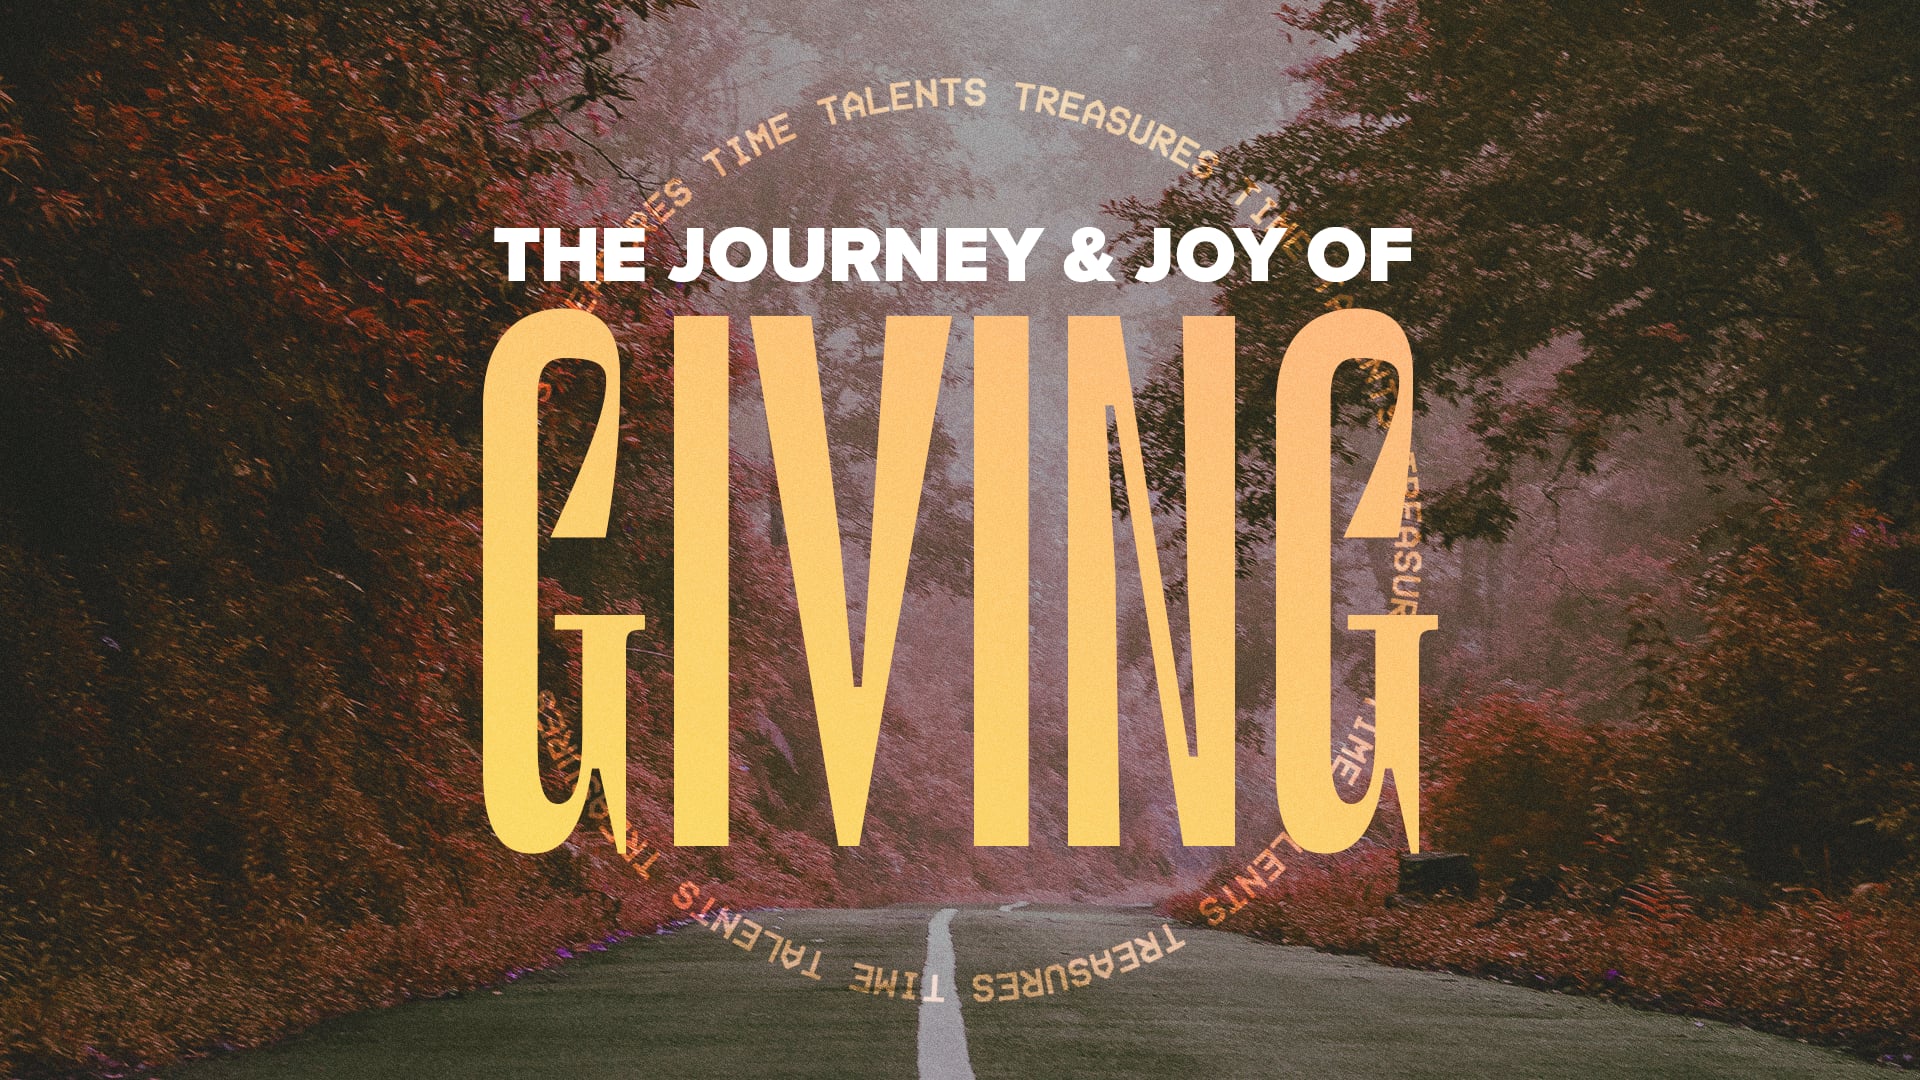 The Journey & Joy of Giving Our Talents